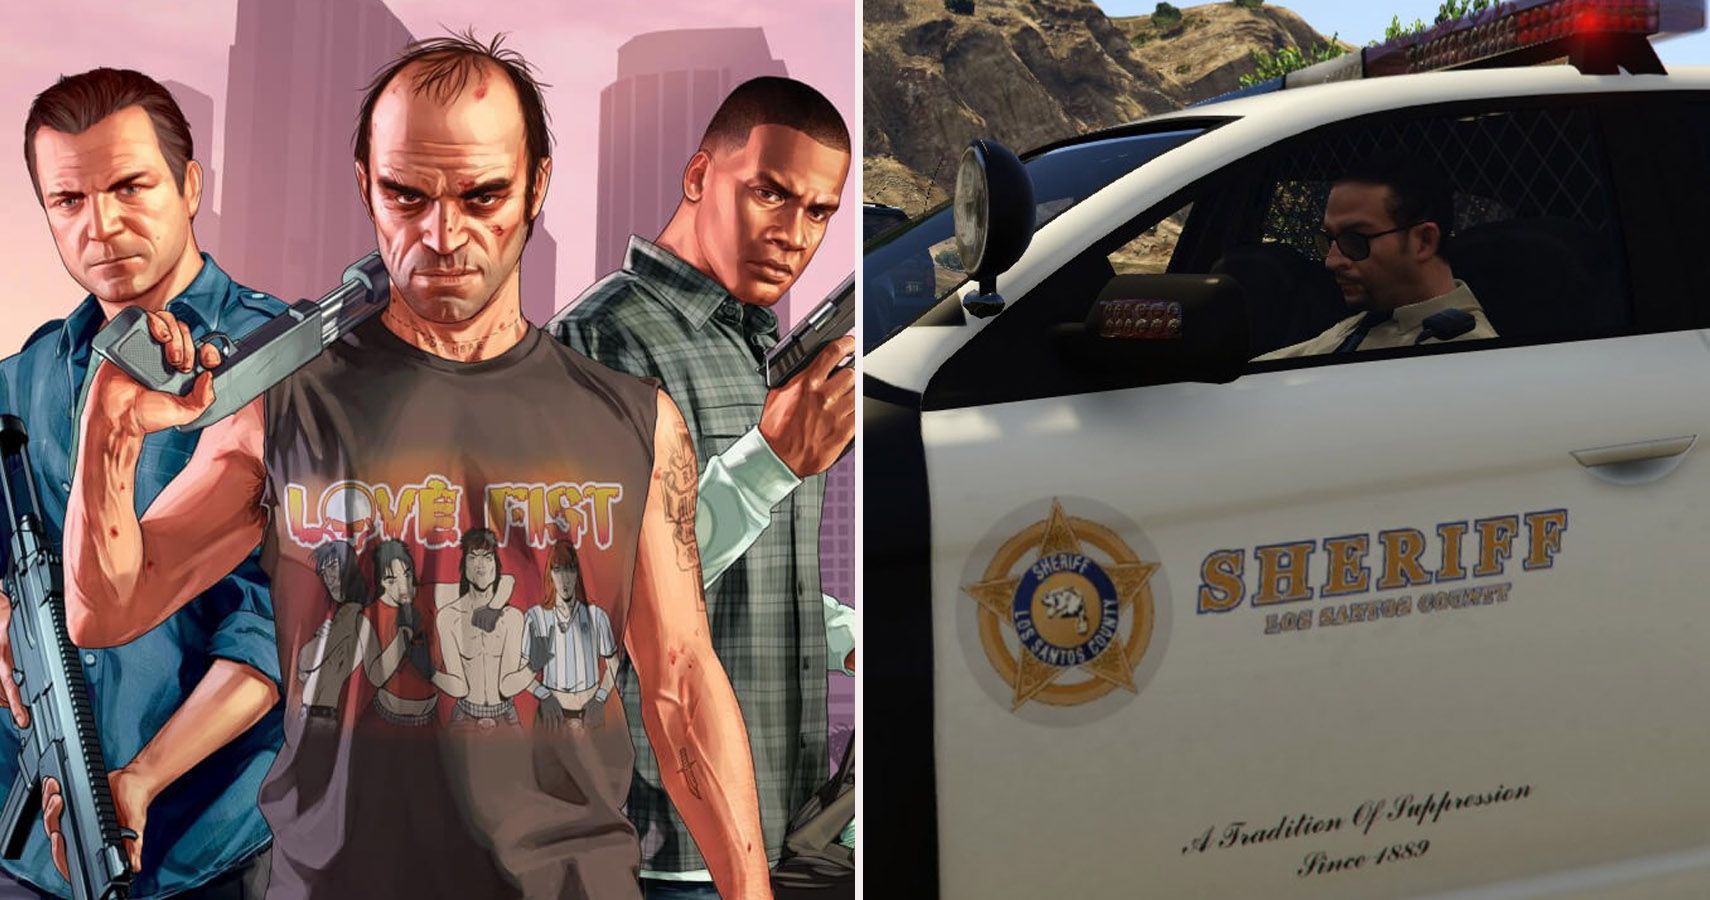 gta 5 real life mod starting out